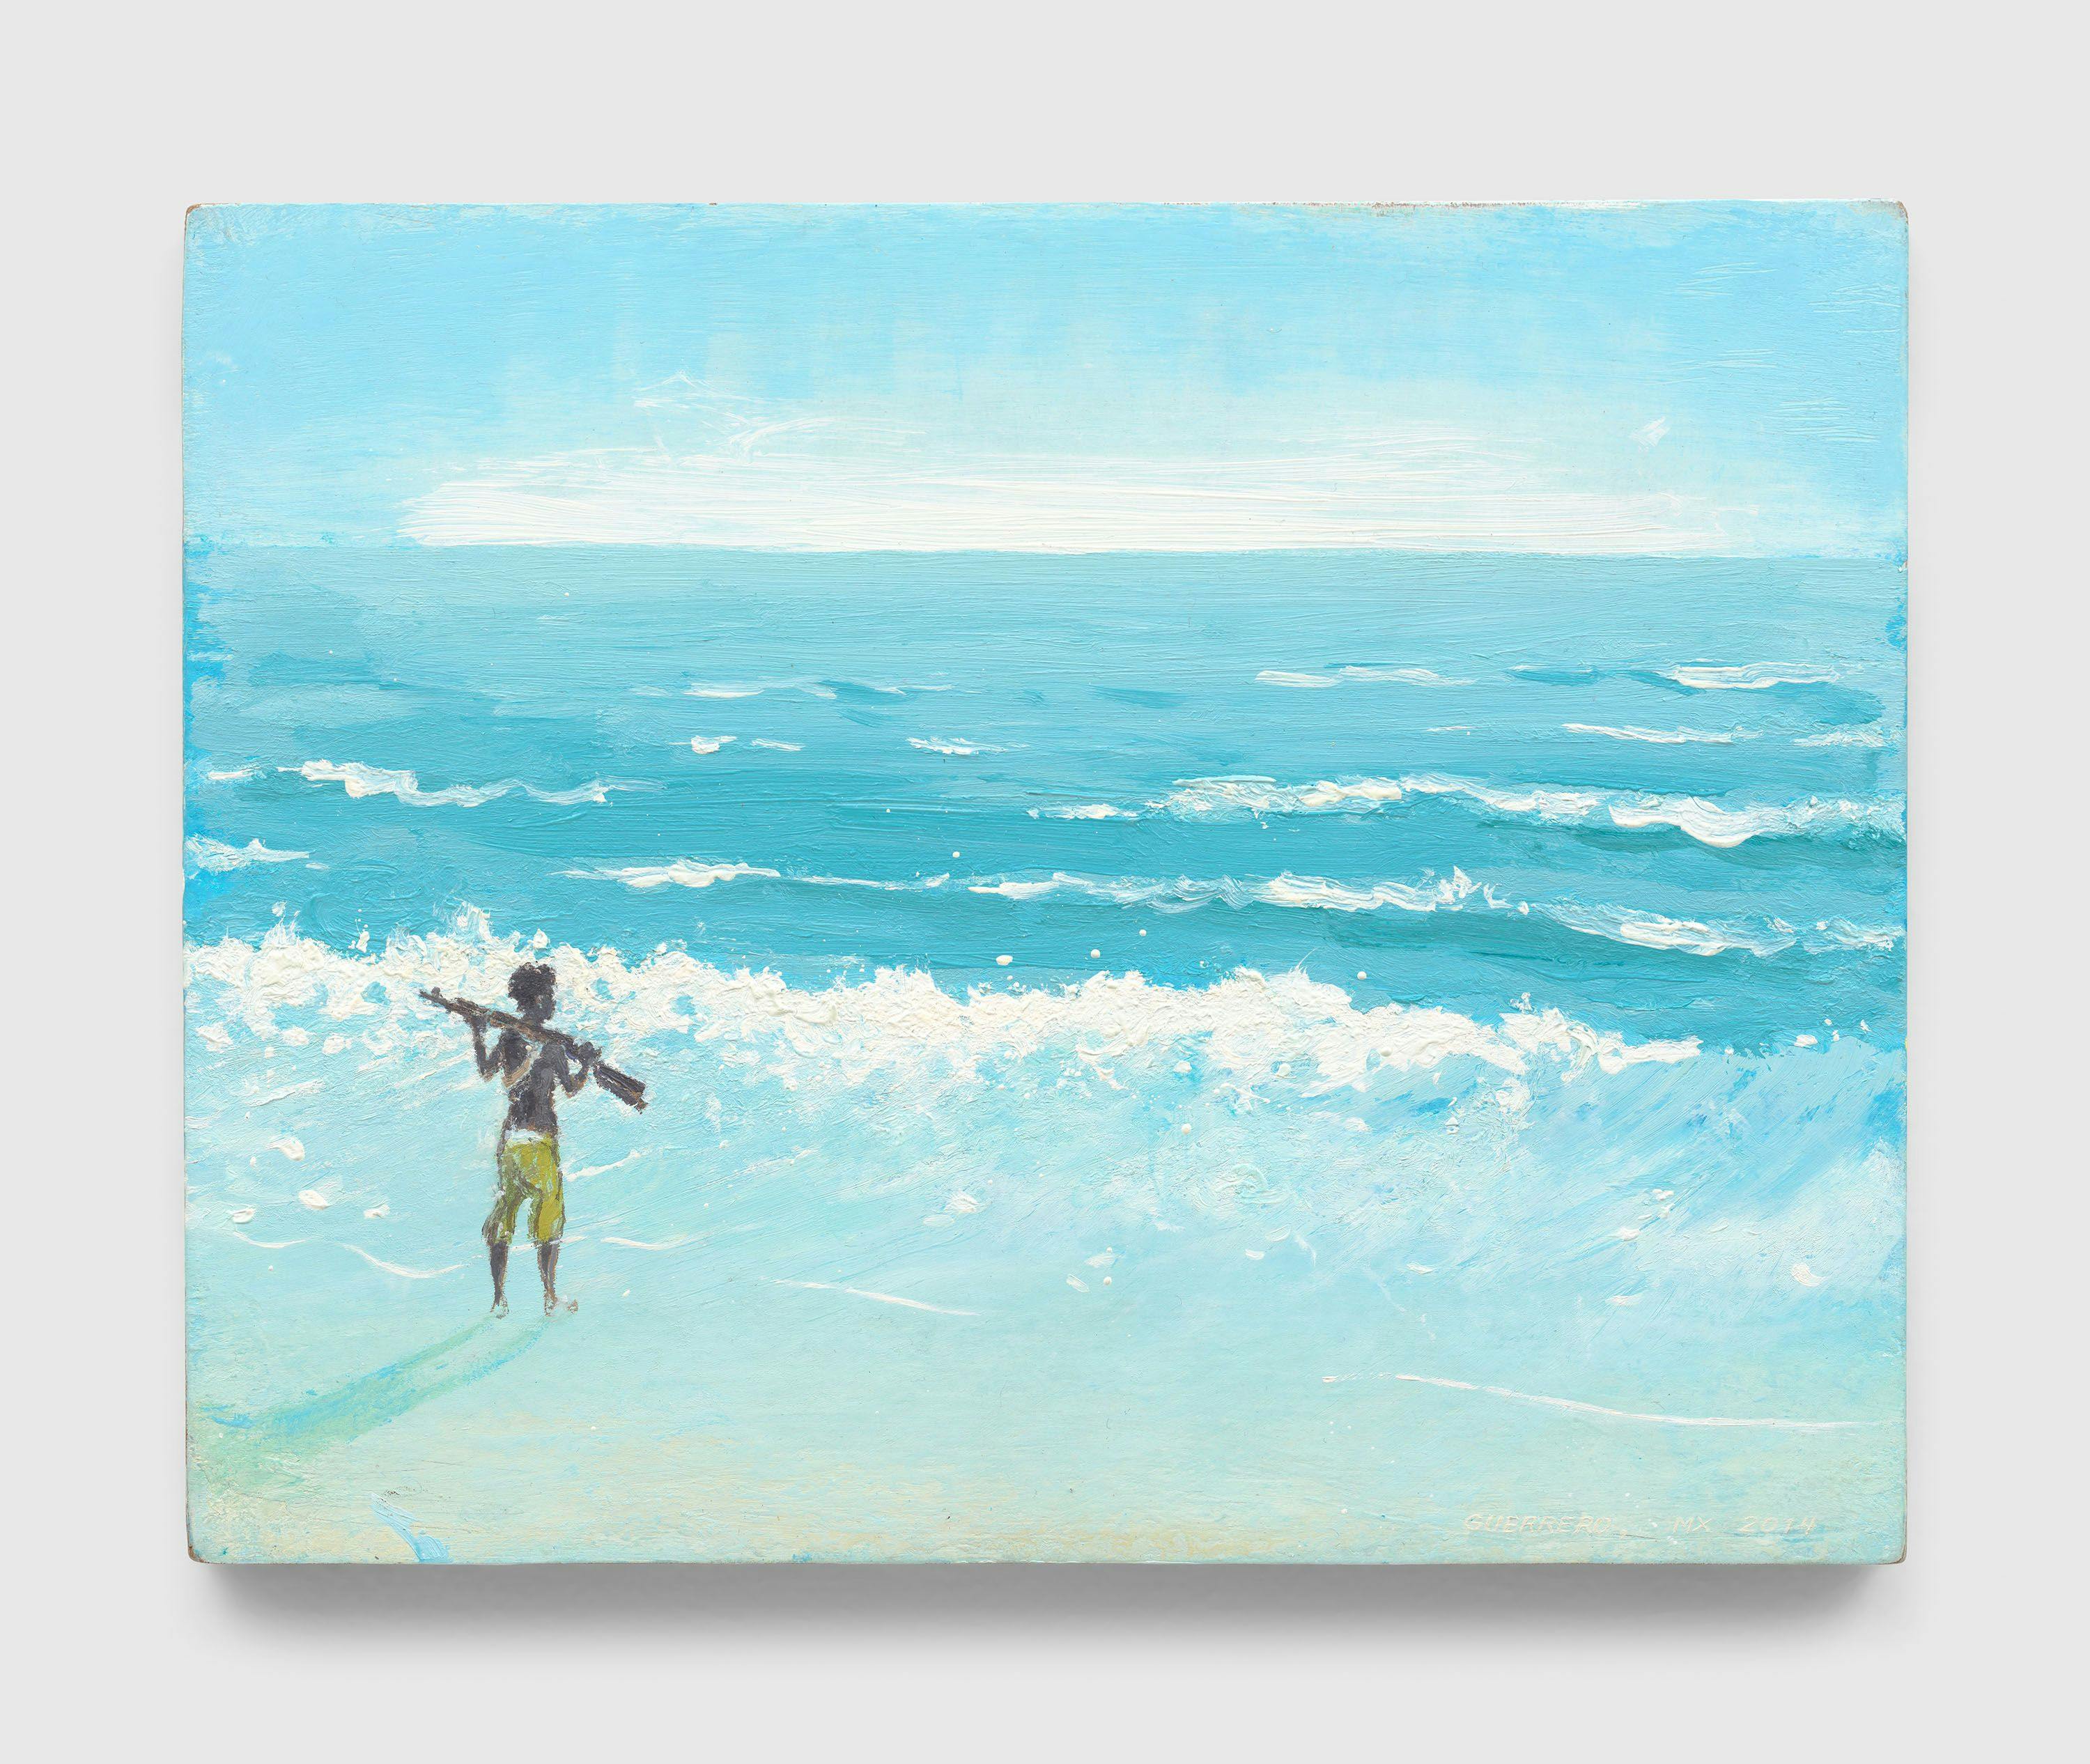 A painting by Francis Alÿs, titled Guerrero, Mexico, dated 2014.